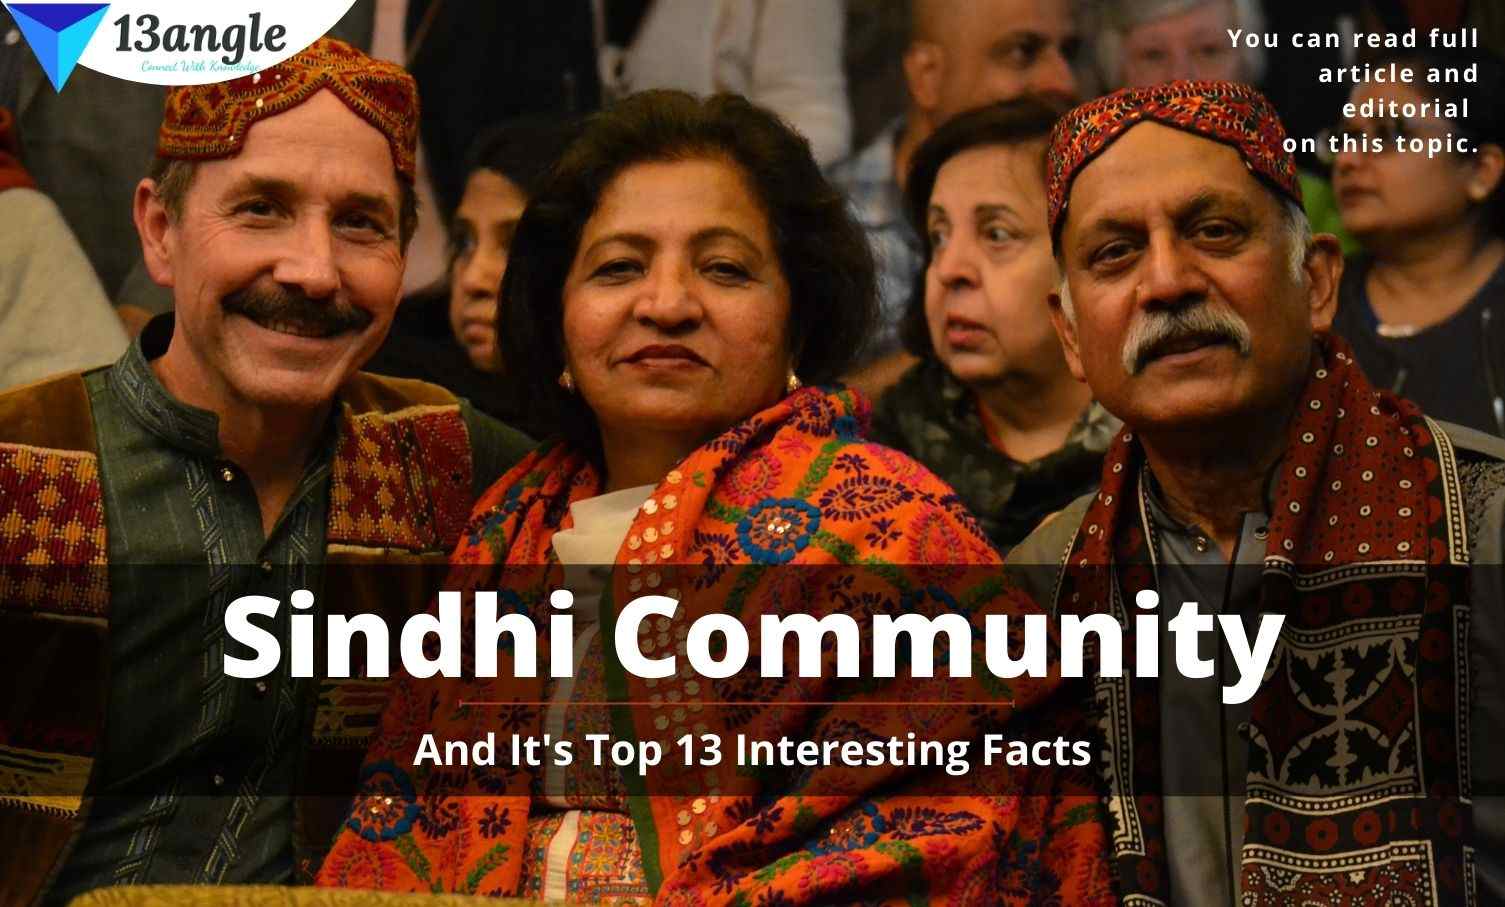 Sindhi Community And It's Top 13 Interesting Facts- 13angle.com